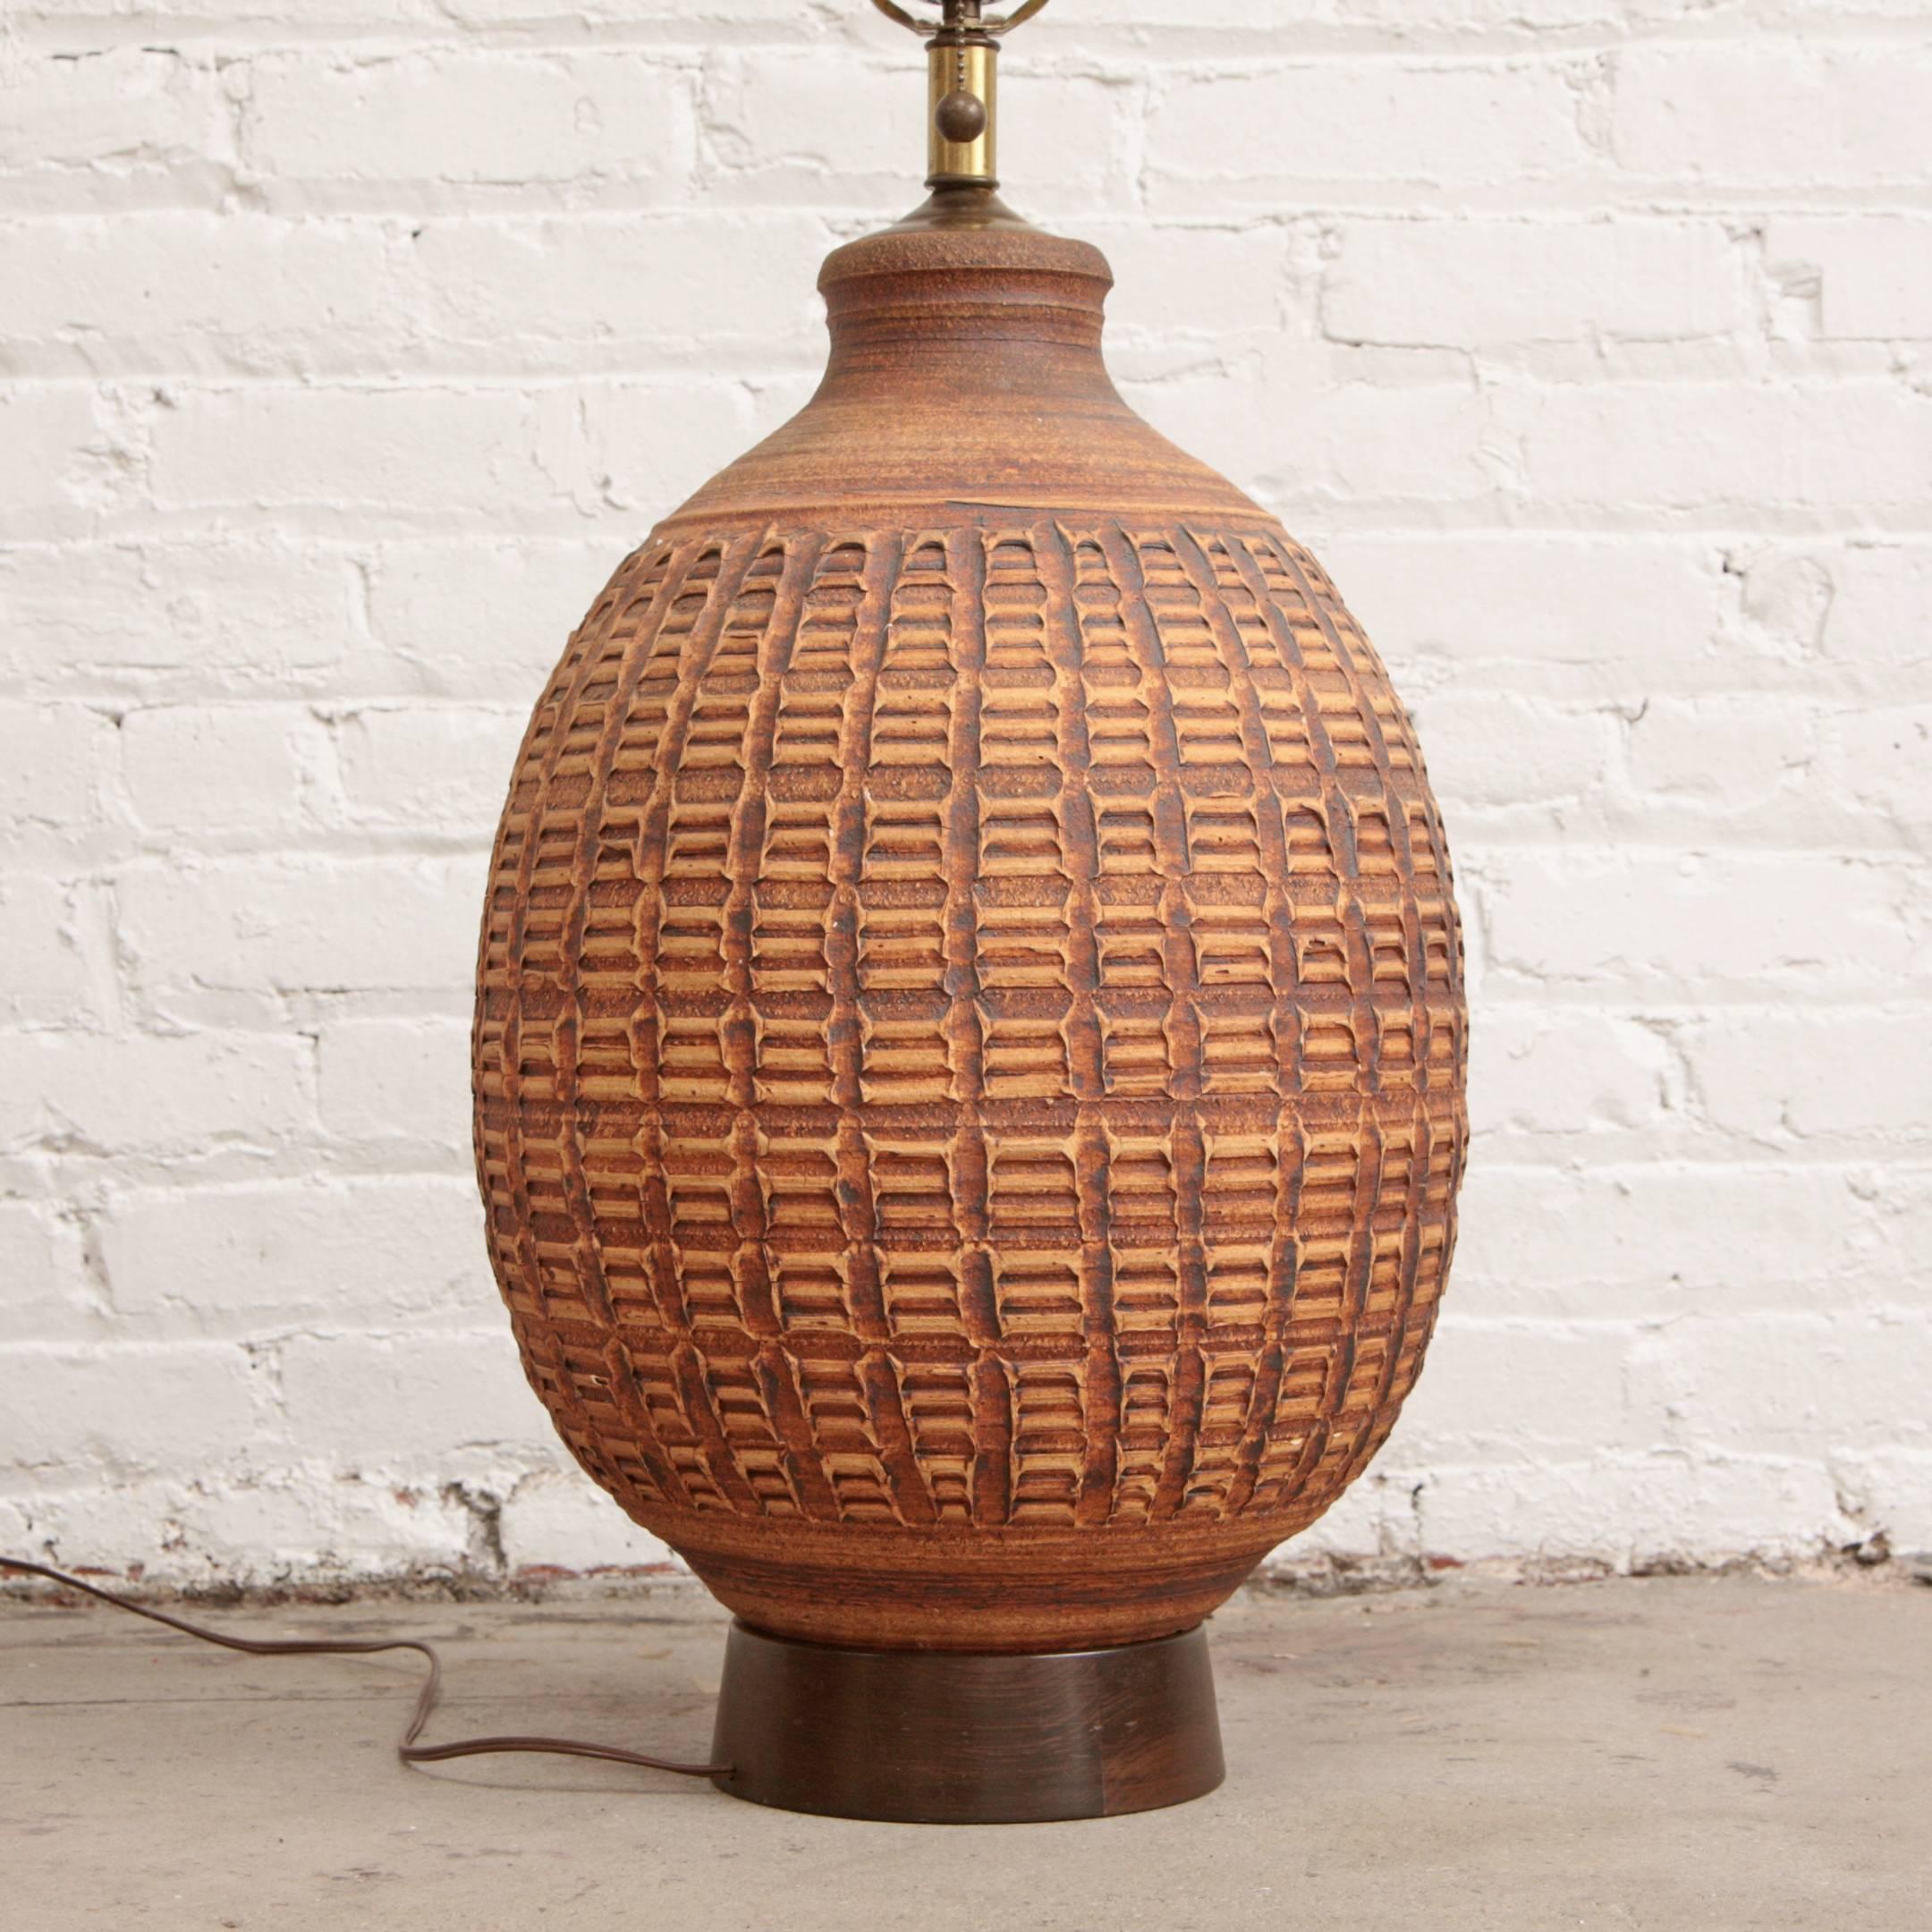 Extra large David Cressey ceramic pottery lamp with original linen shade. Creates a beautiful warm room glow. Architectural Pottery, California Modern. Working, original wiring.